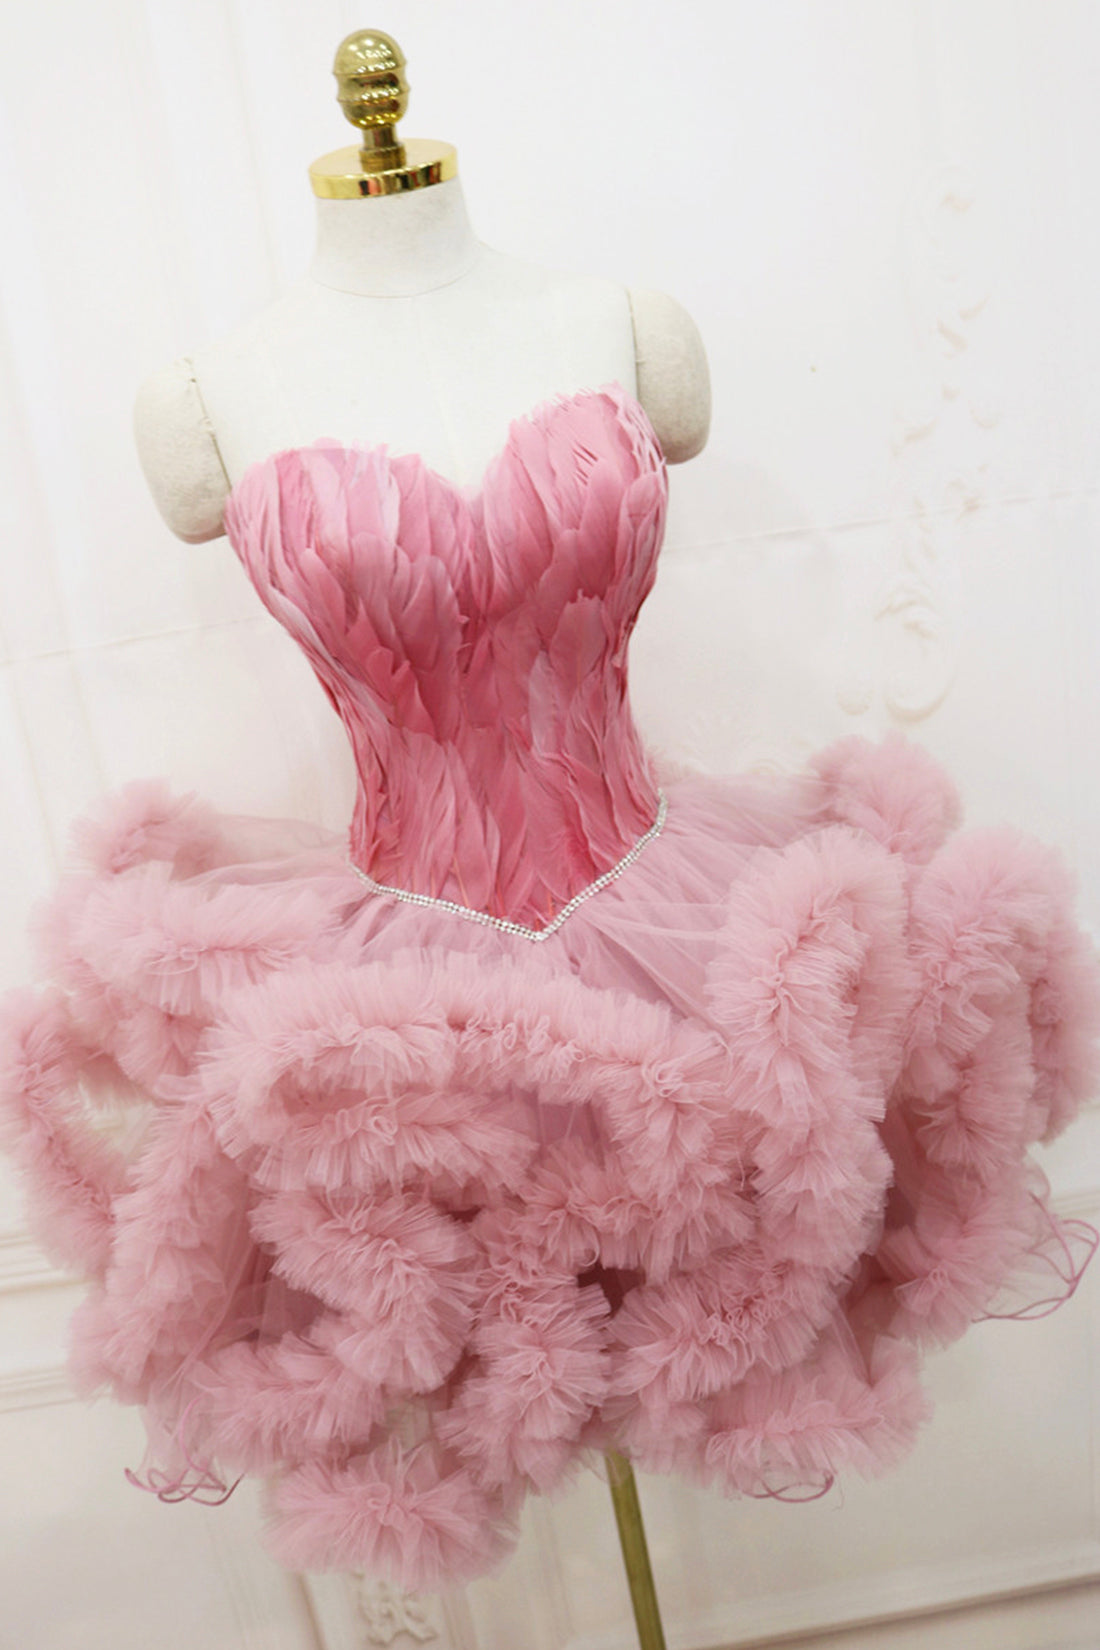 Pink Sweetheart Neck Tulle Party Dress, A Line Short Prom Dress with Feather